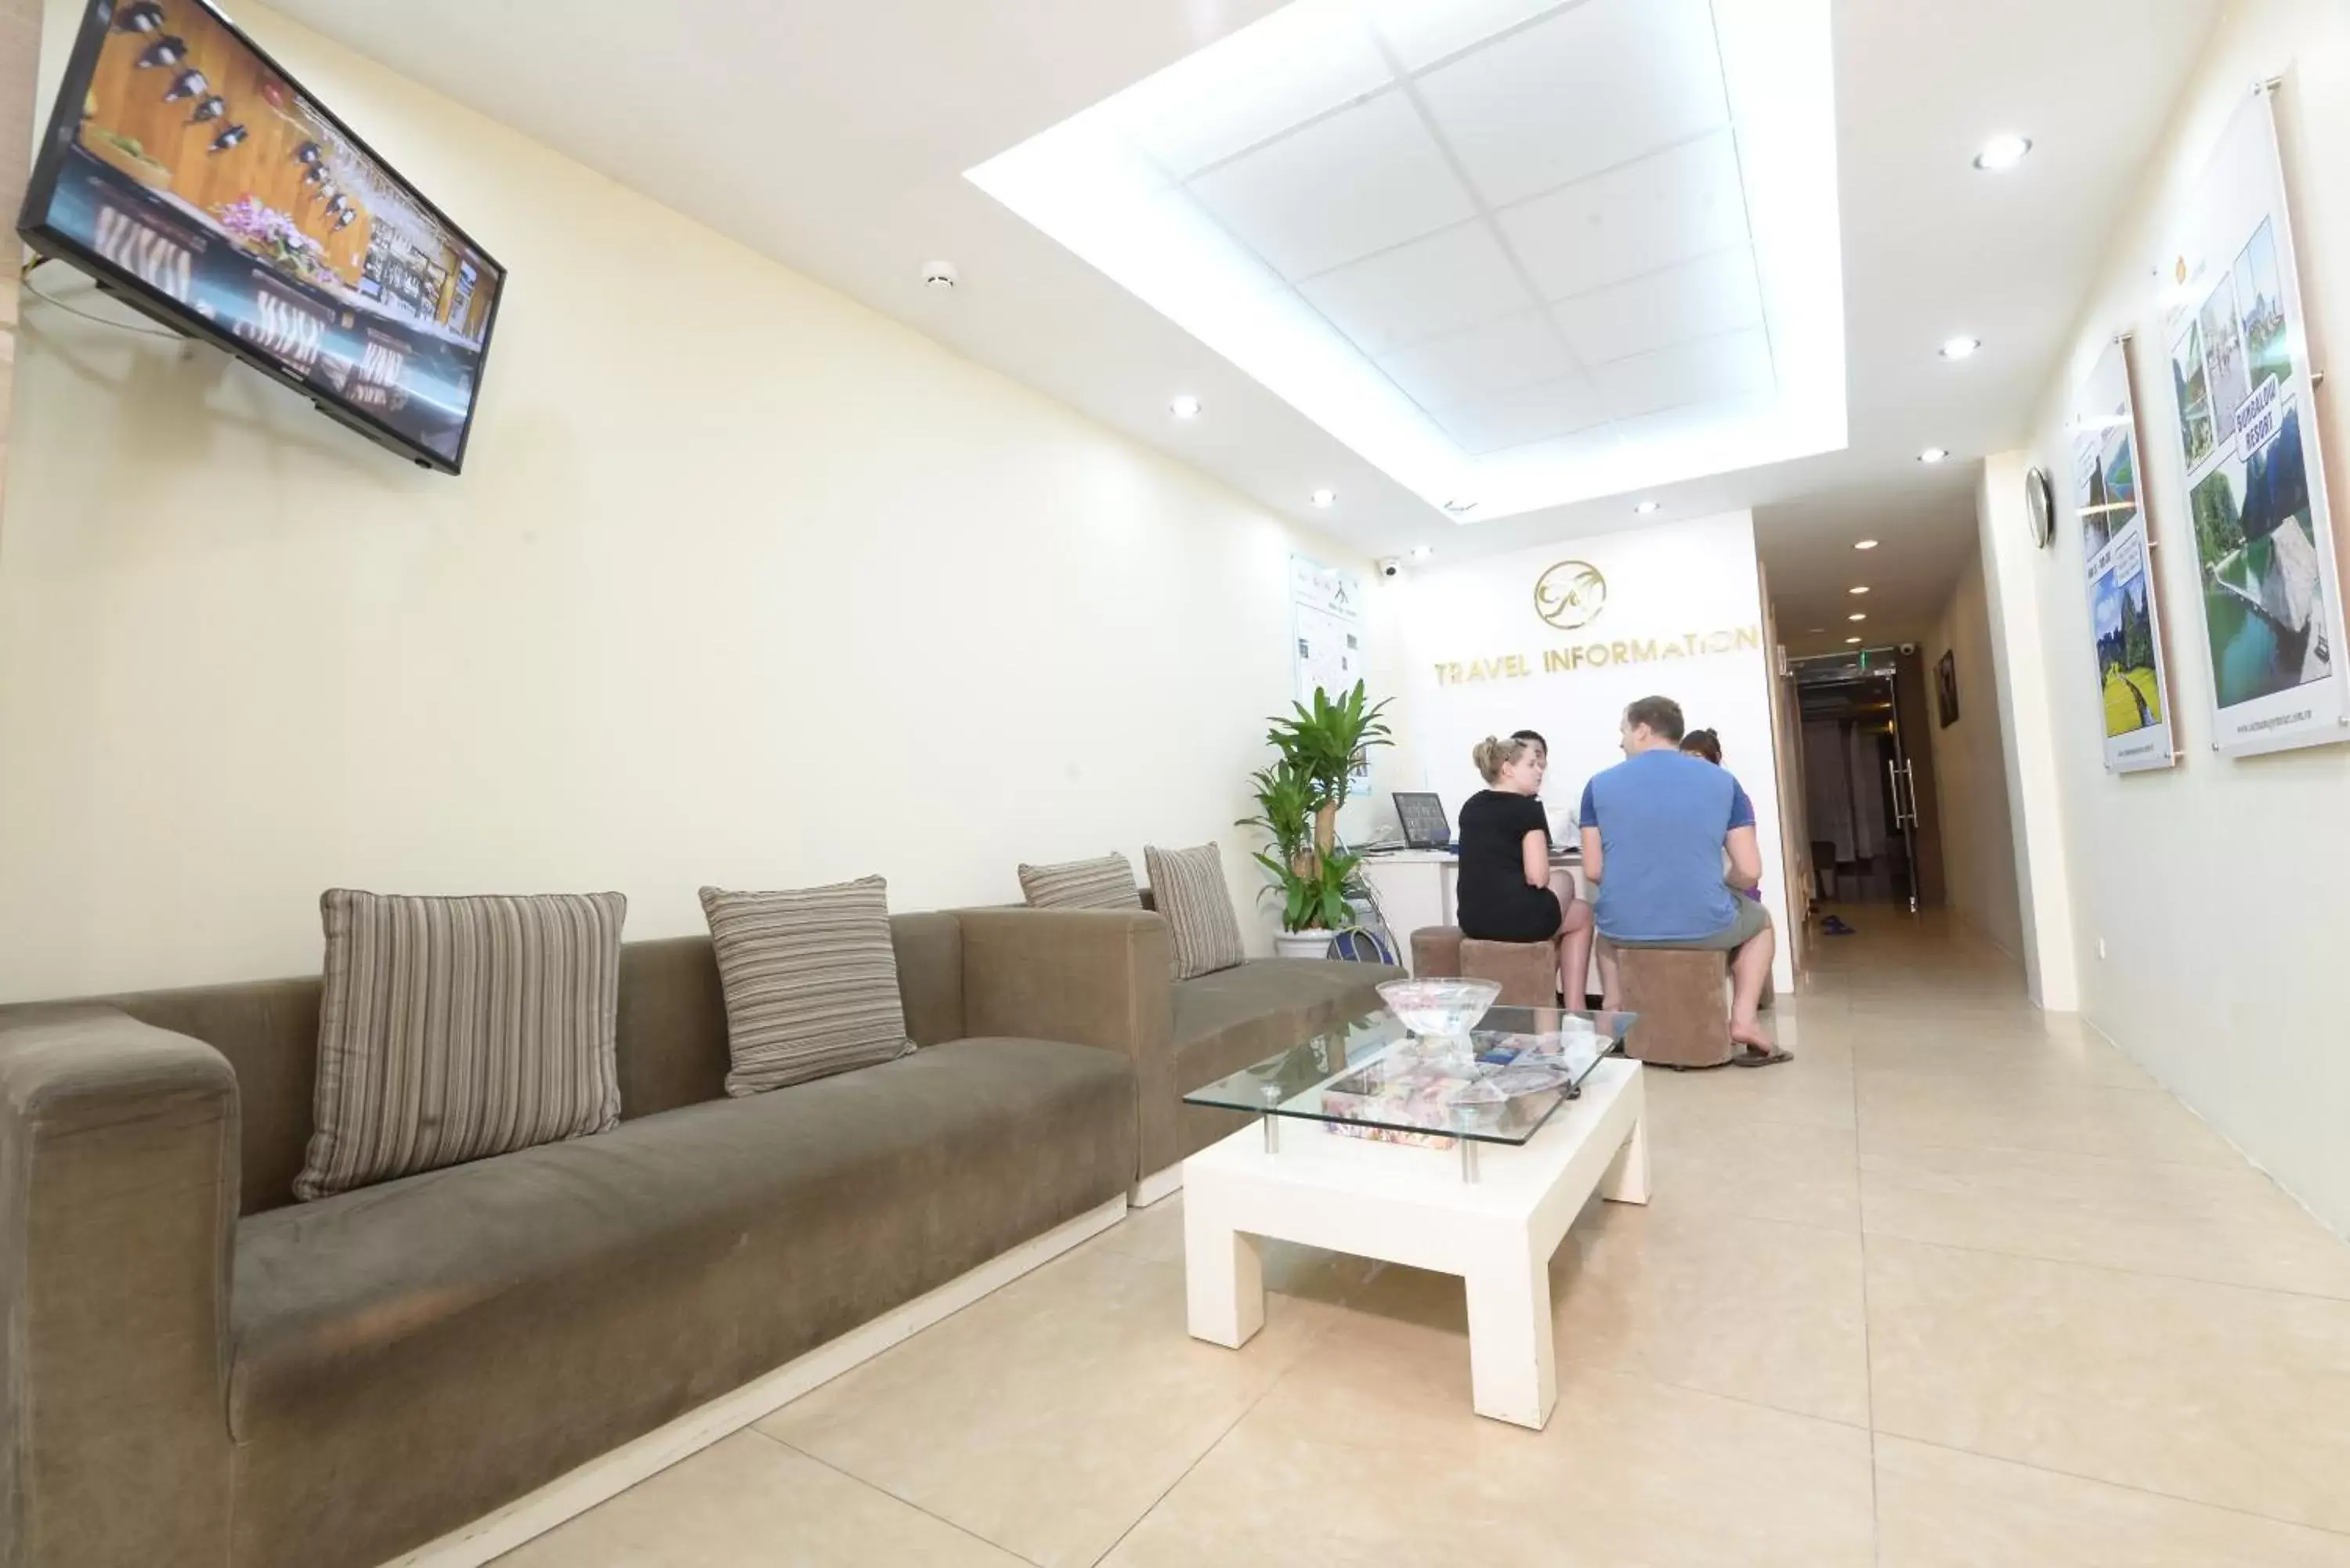 Business facilities in Mai Charming Hotel and Spa